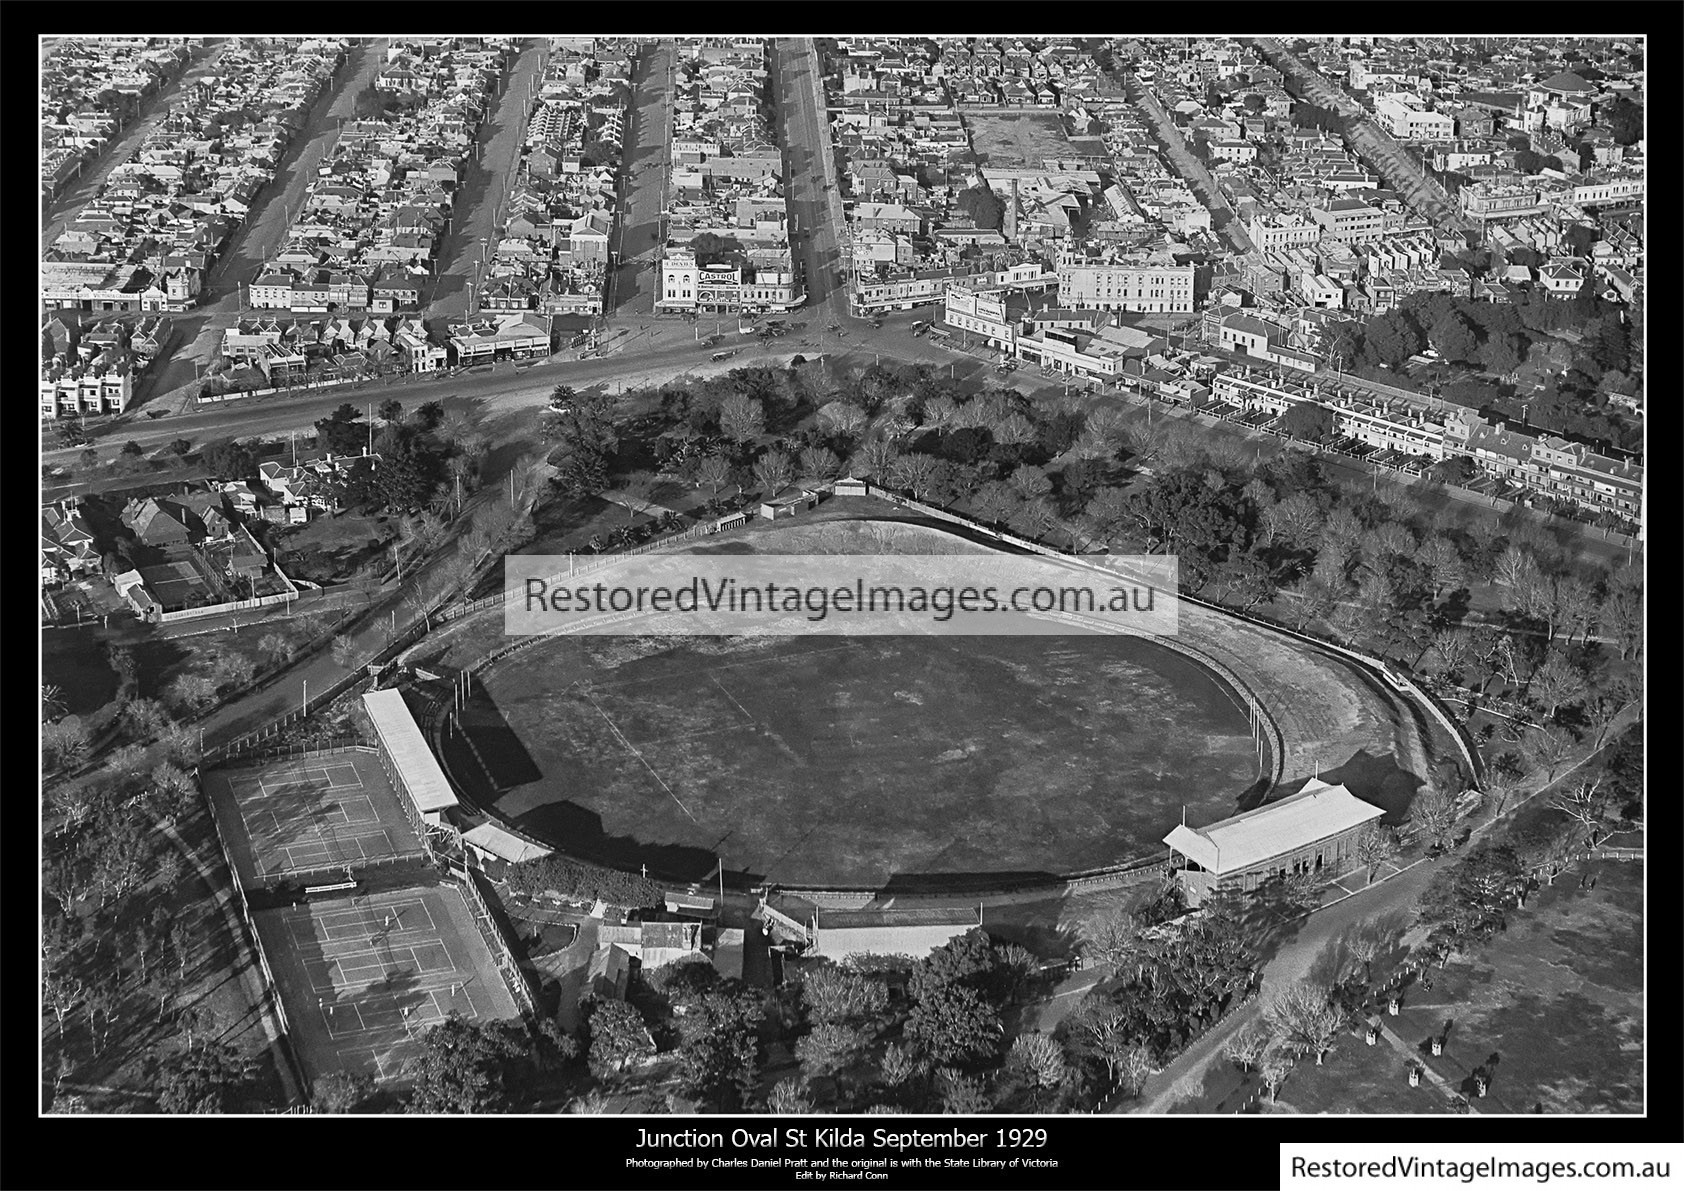 St Kilda’s  Junction Oval Showing The Road Junction In 1929